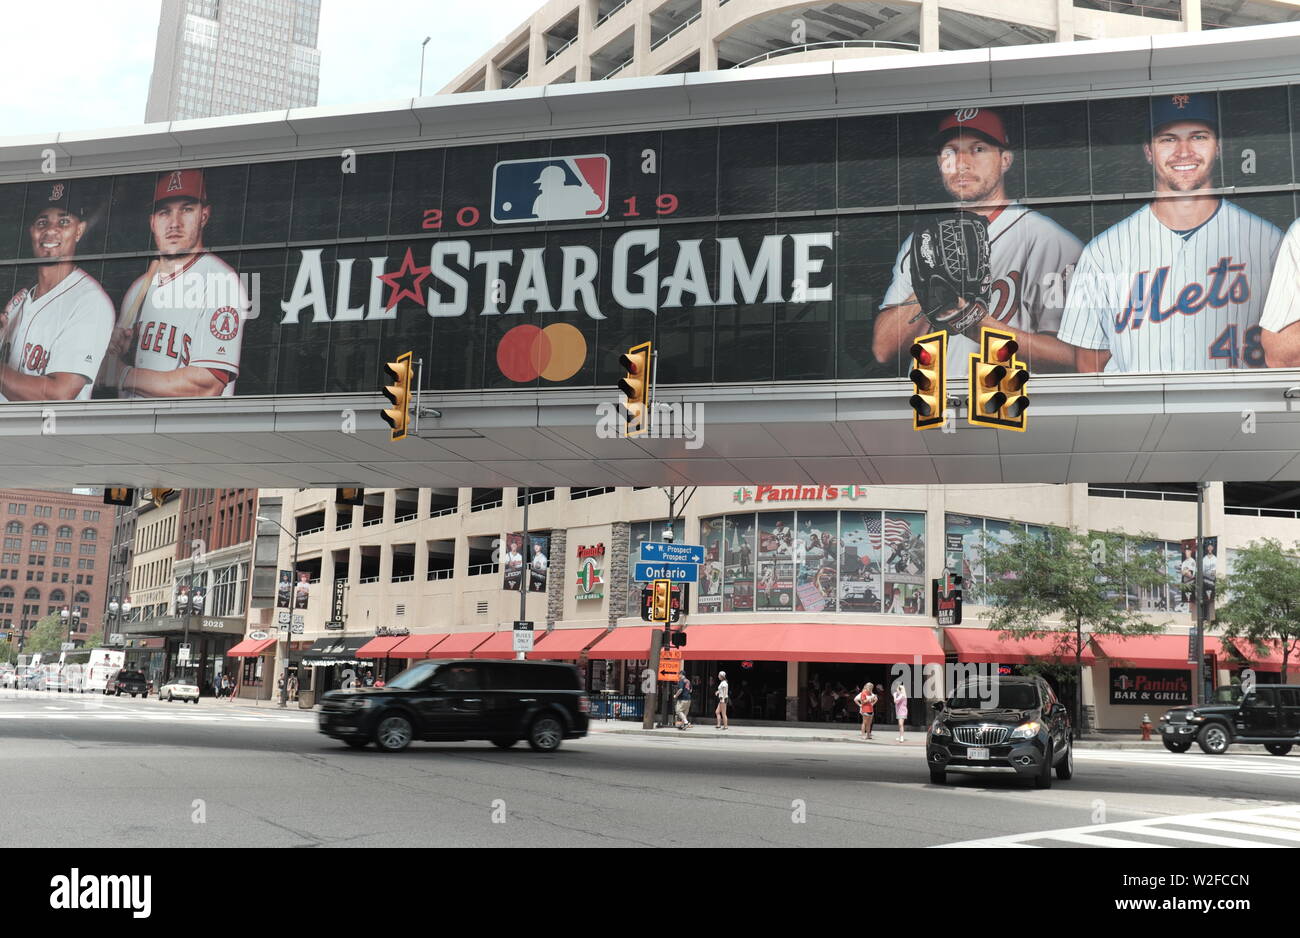 Cleveland, Ohio, USA plays host to the 2019 MLB All-Star Game with major events throughout the city leading up to the July 9, 2019 game. Stock Photo